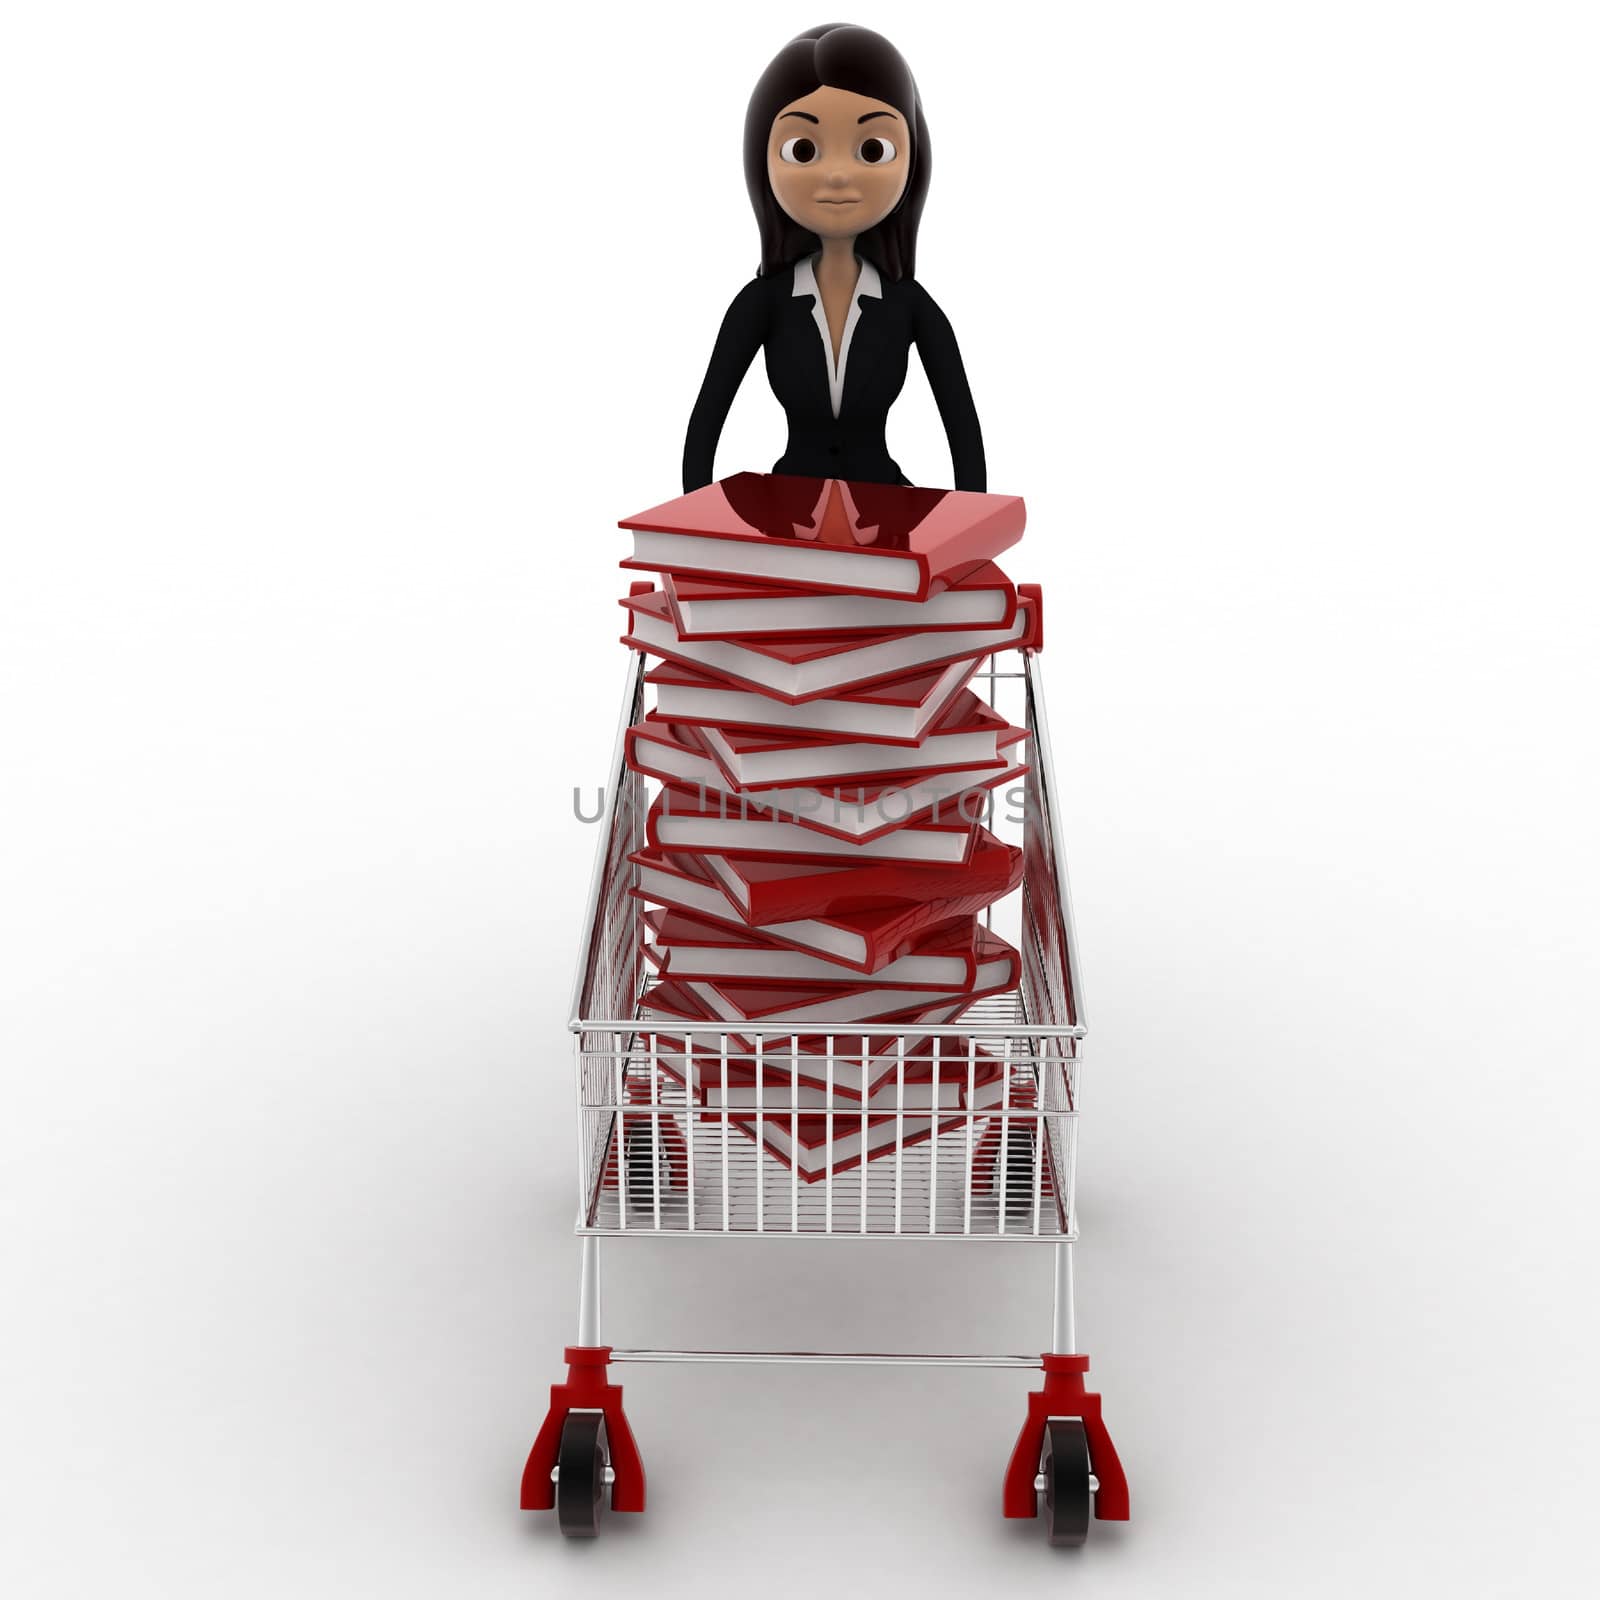 3d woman with cart and books in it concept by touchmenithin@gmail.com